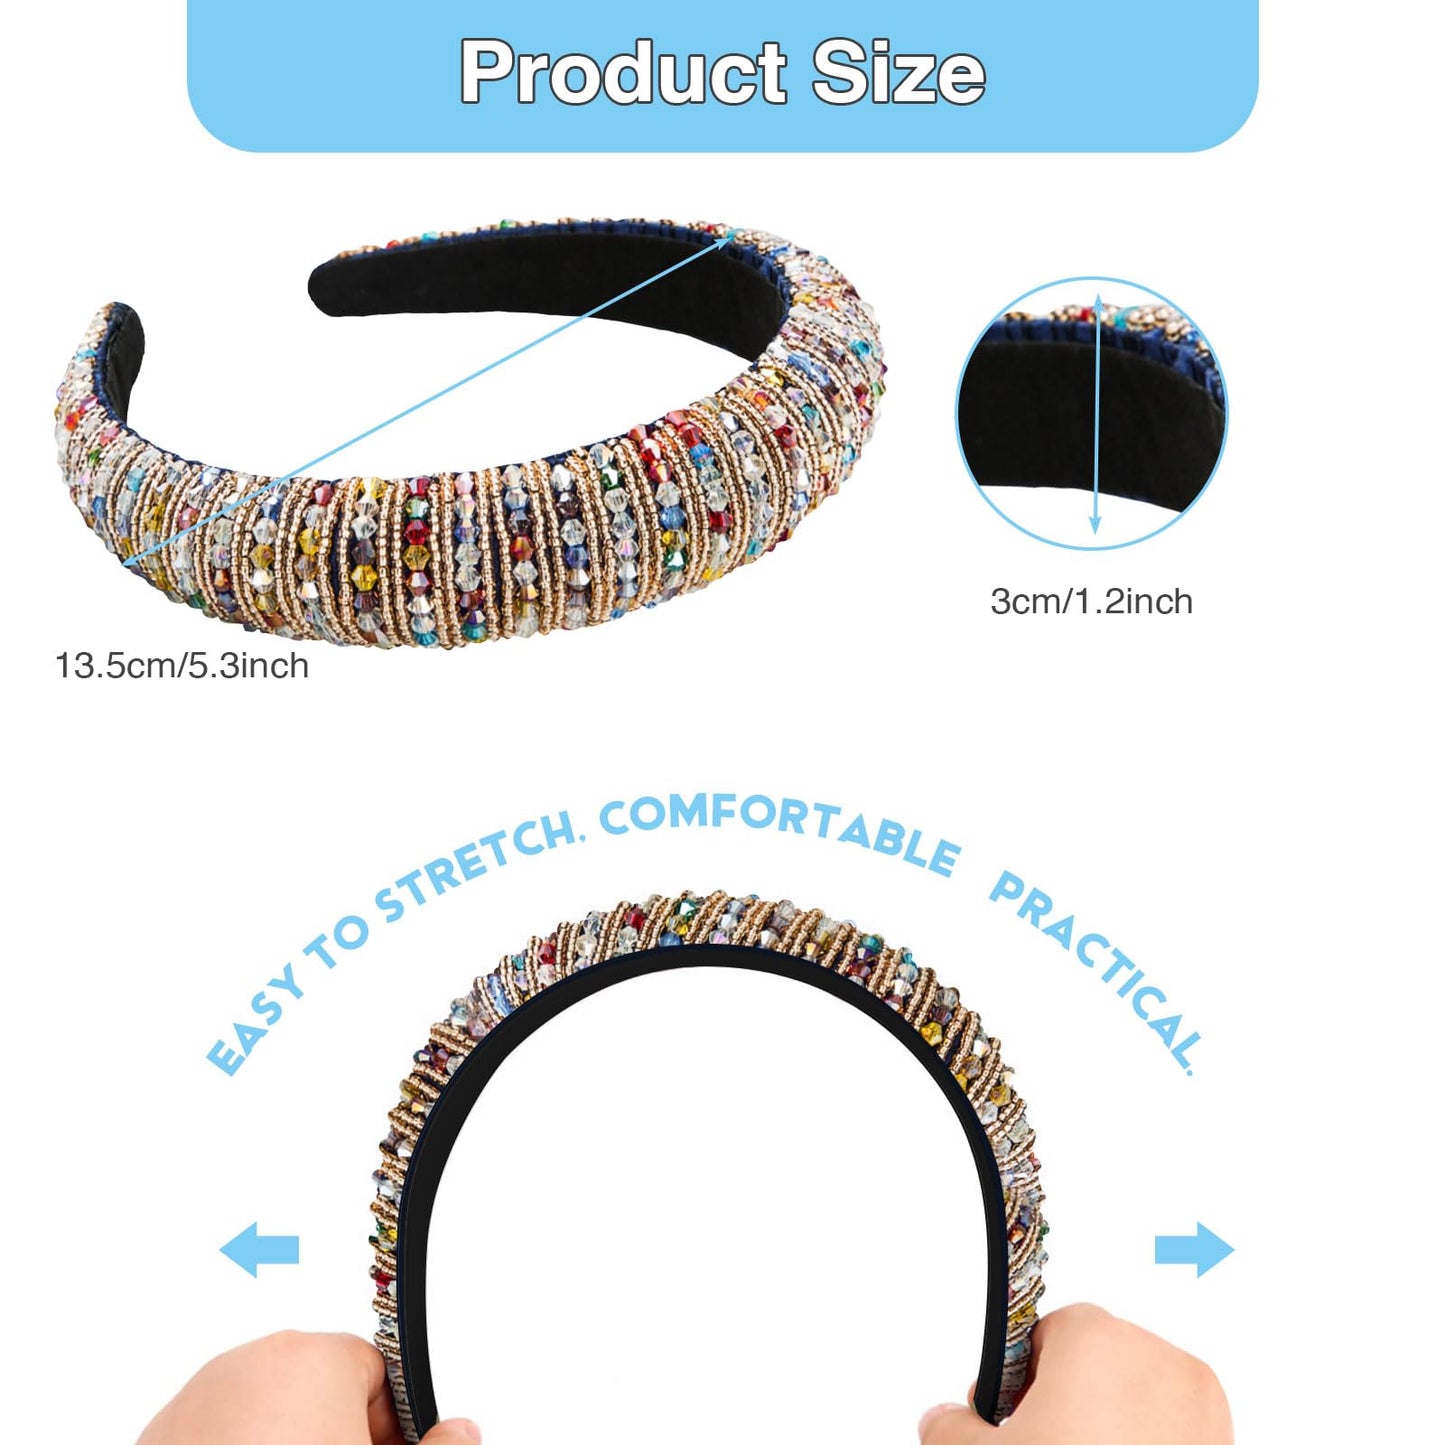 YFKEJI Headbands for Women,Hair accessories for women, Beads Headband for Thick Hair Bejewelled Hairband Glitter Hair Hoops Hair Accessories for Girls Fashion, Multi-colored(H#)